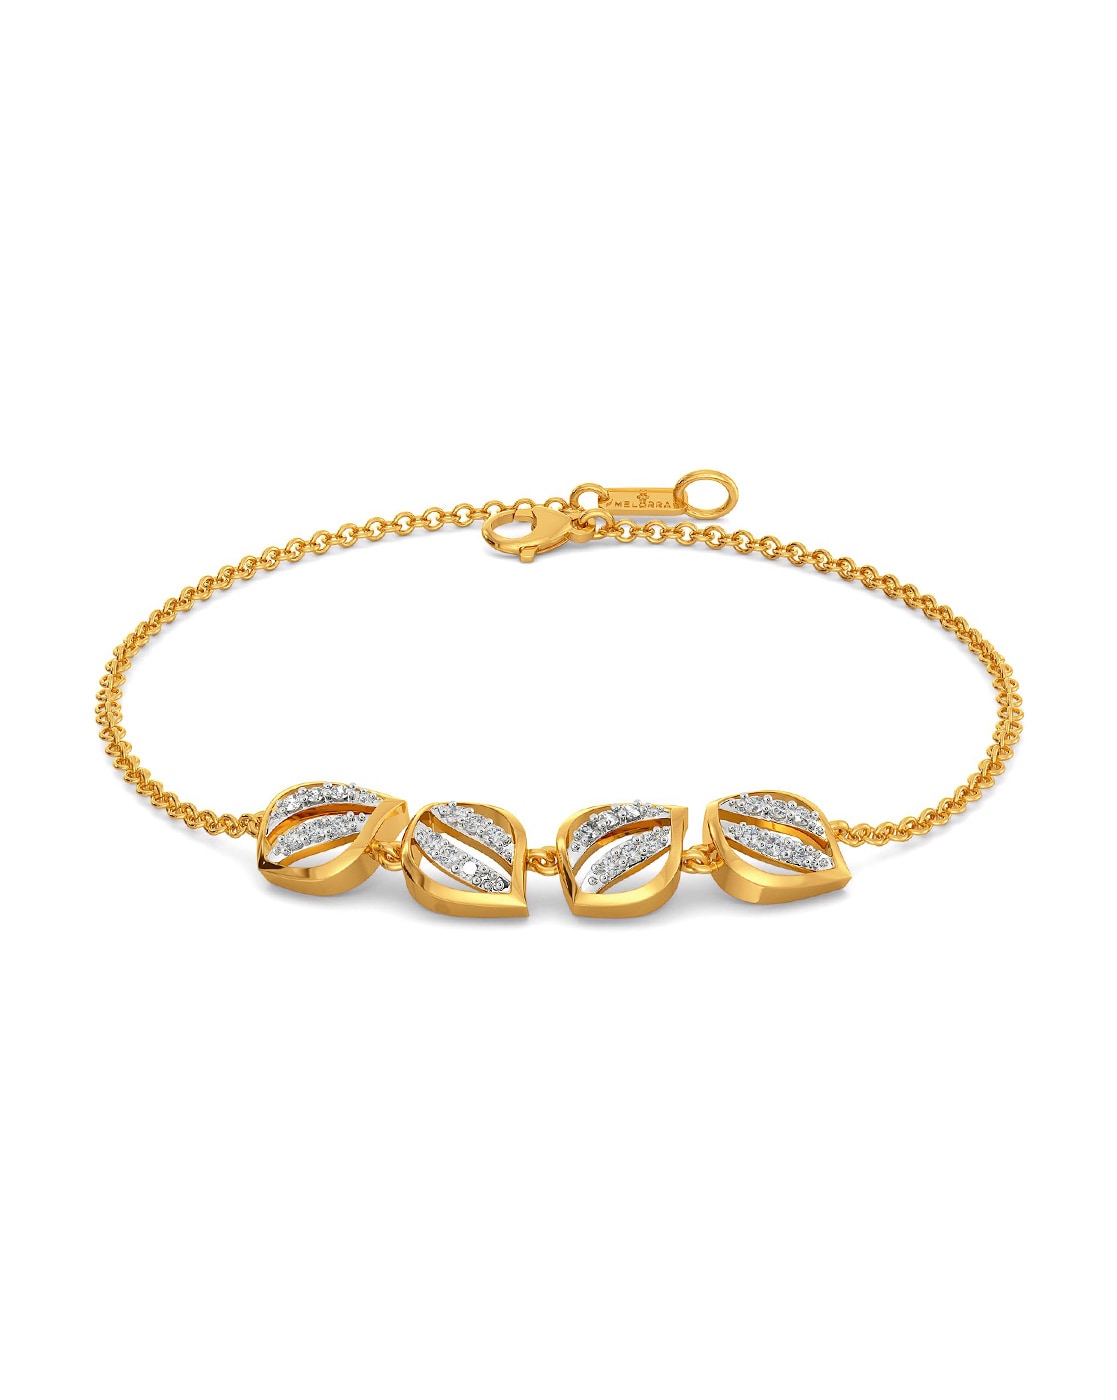 Buy latest Gold Bracelet designs for men and women| Lalithaa Jewellery